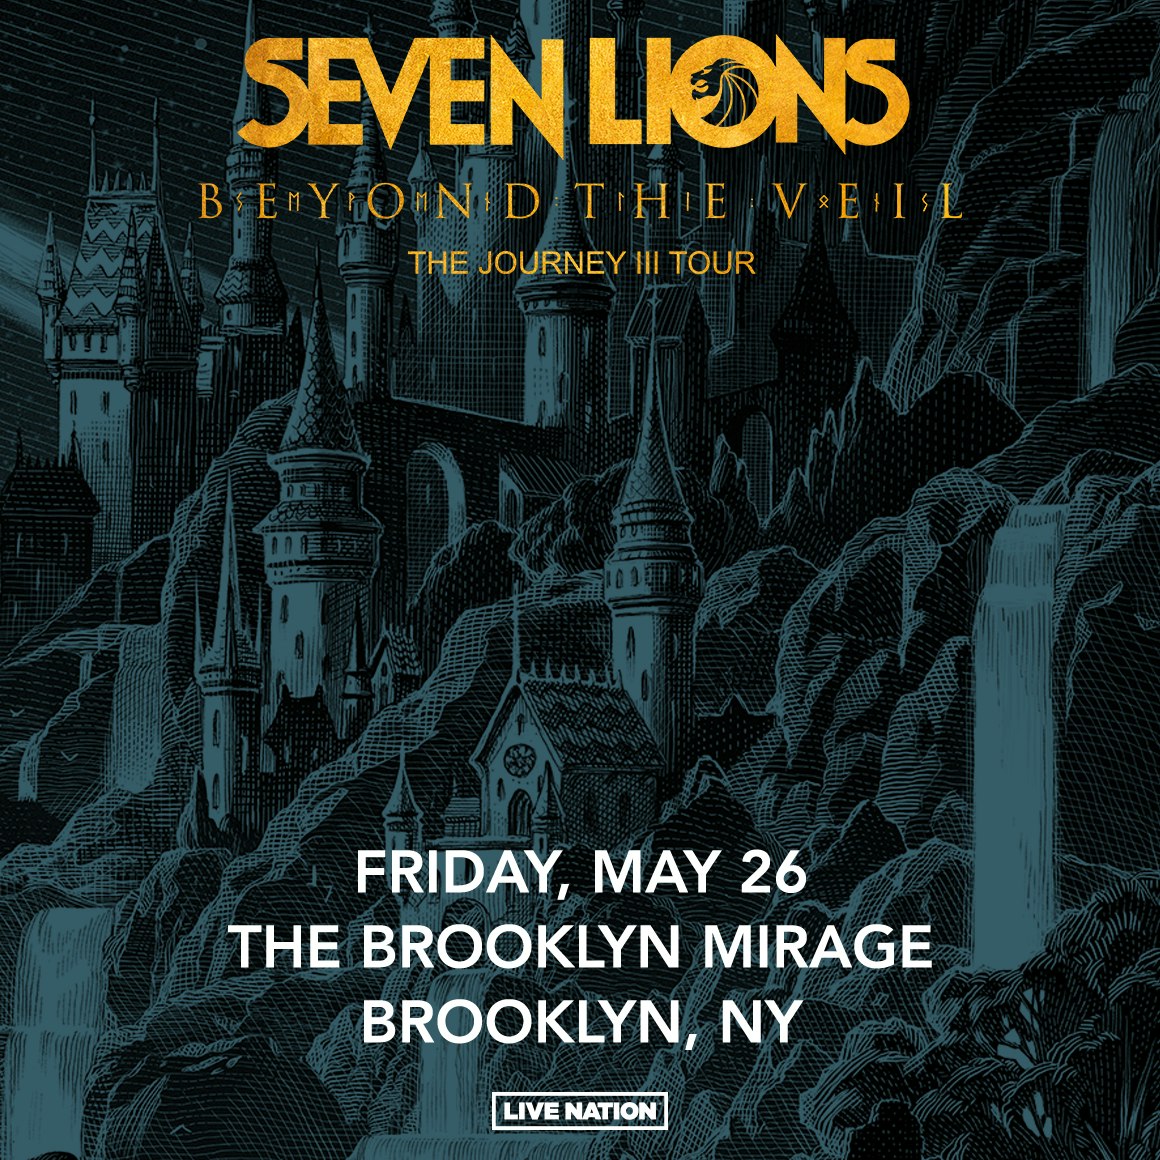 SEVEN LIONS BEYOND THE VEIL THE JOURNEY III TOUR at The Brooklyn